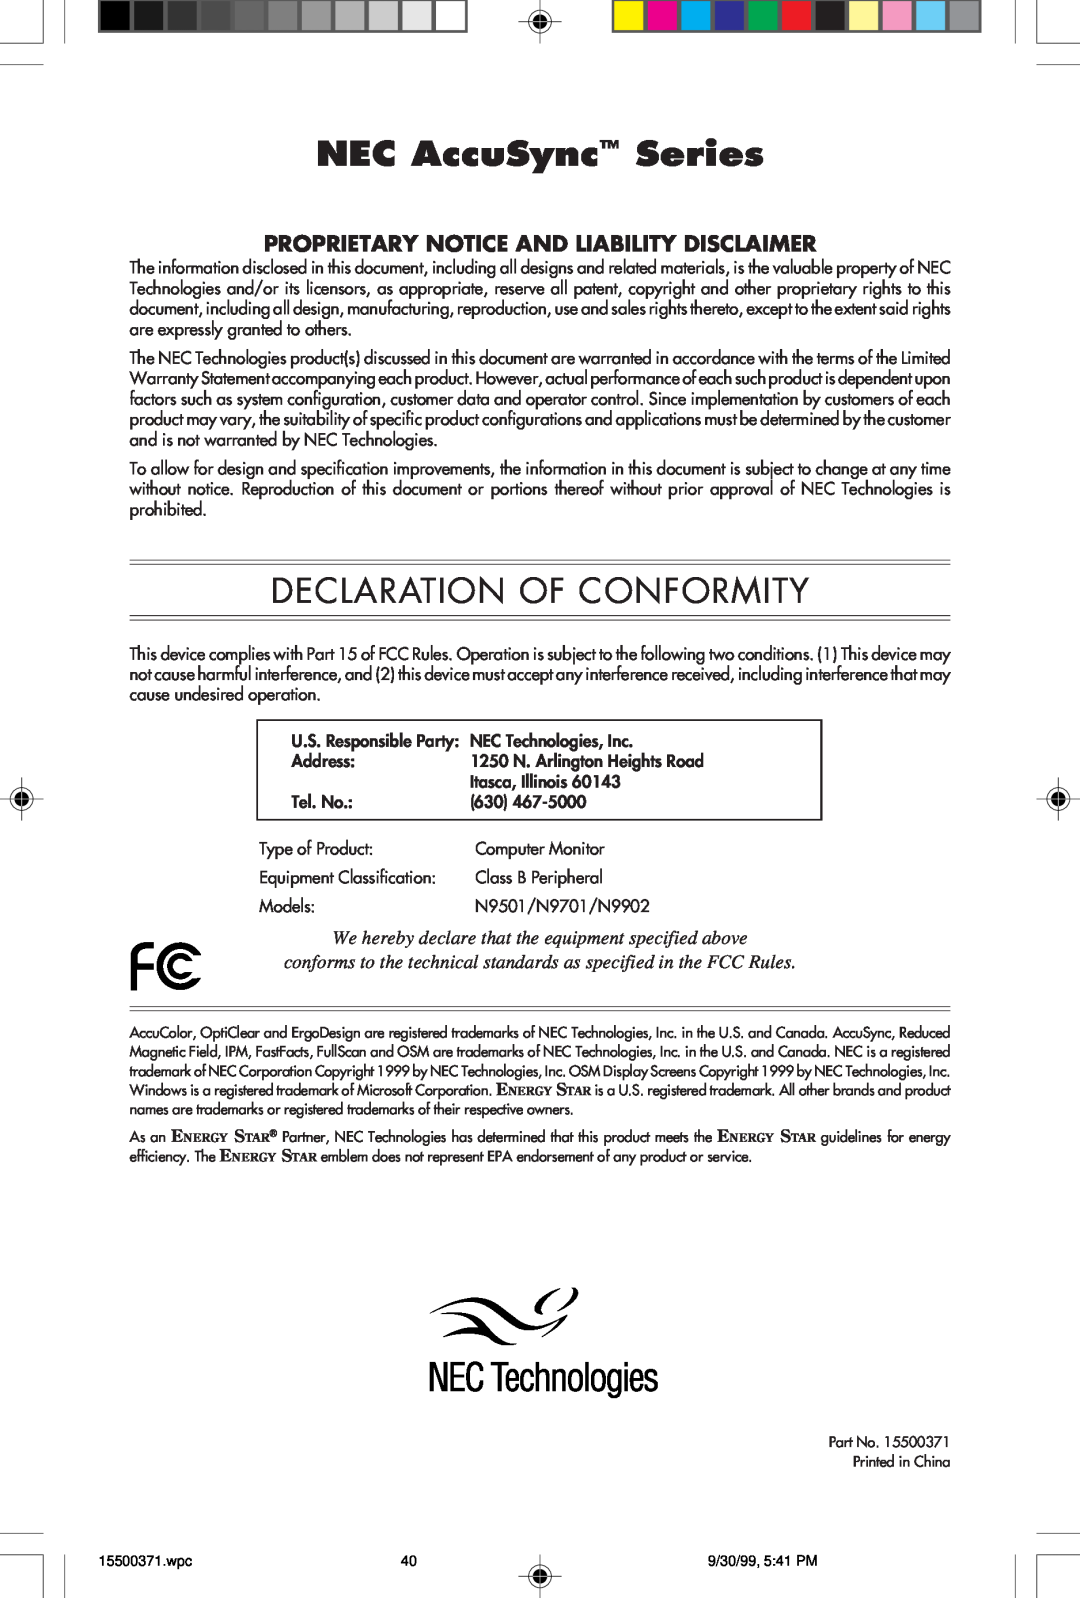 NEC N9501, N9701, N9902 NEC AccuSync Series, Declaration Of Conformity, Proprietary Notice And Liability Disclaimer 